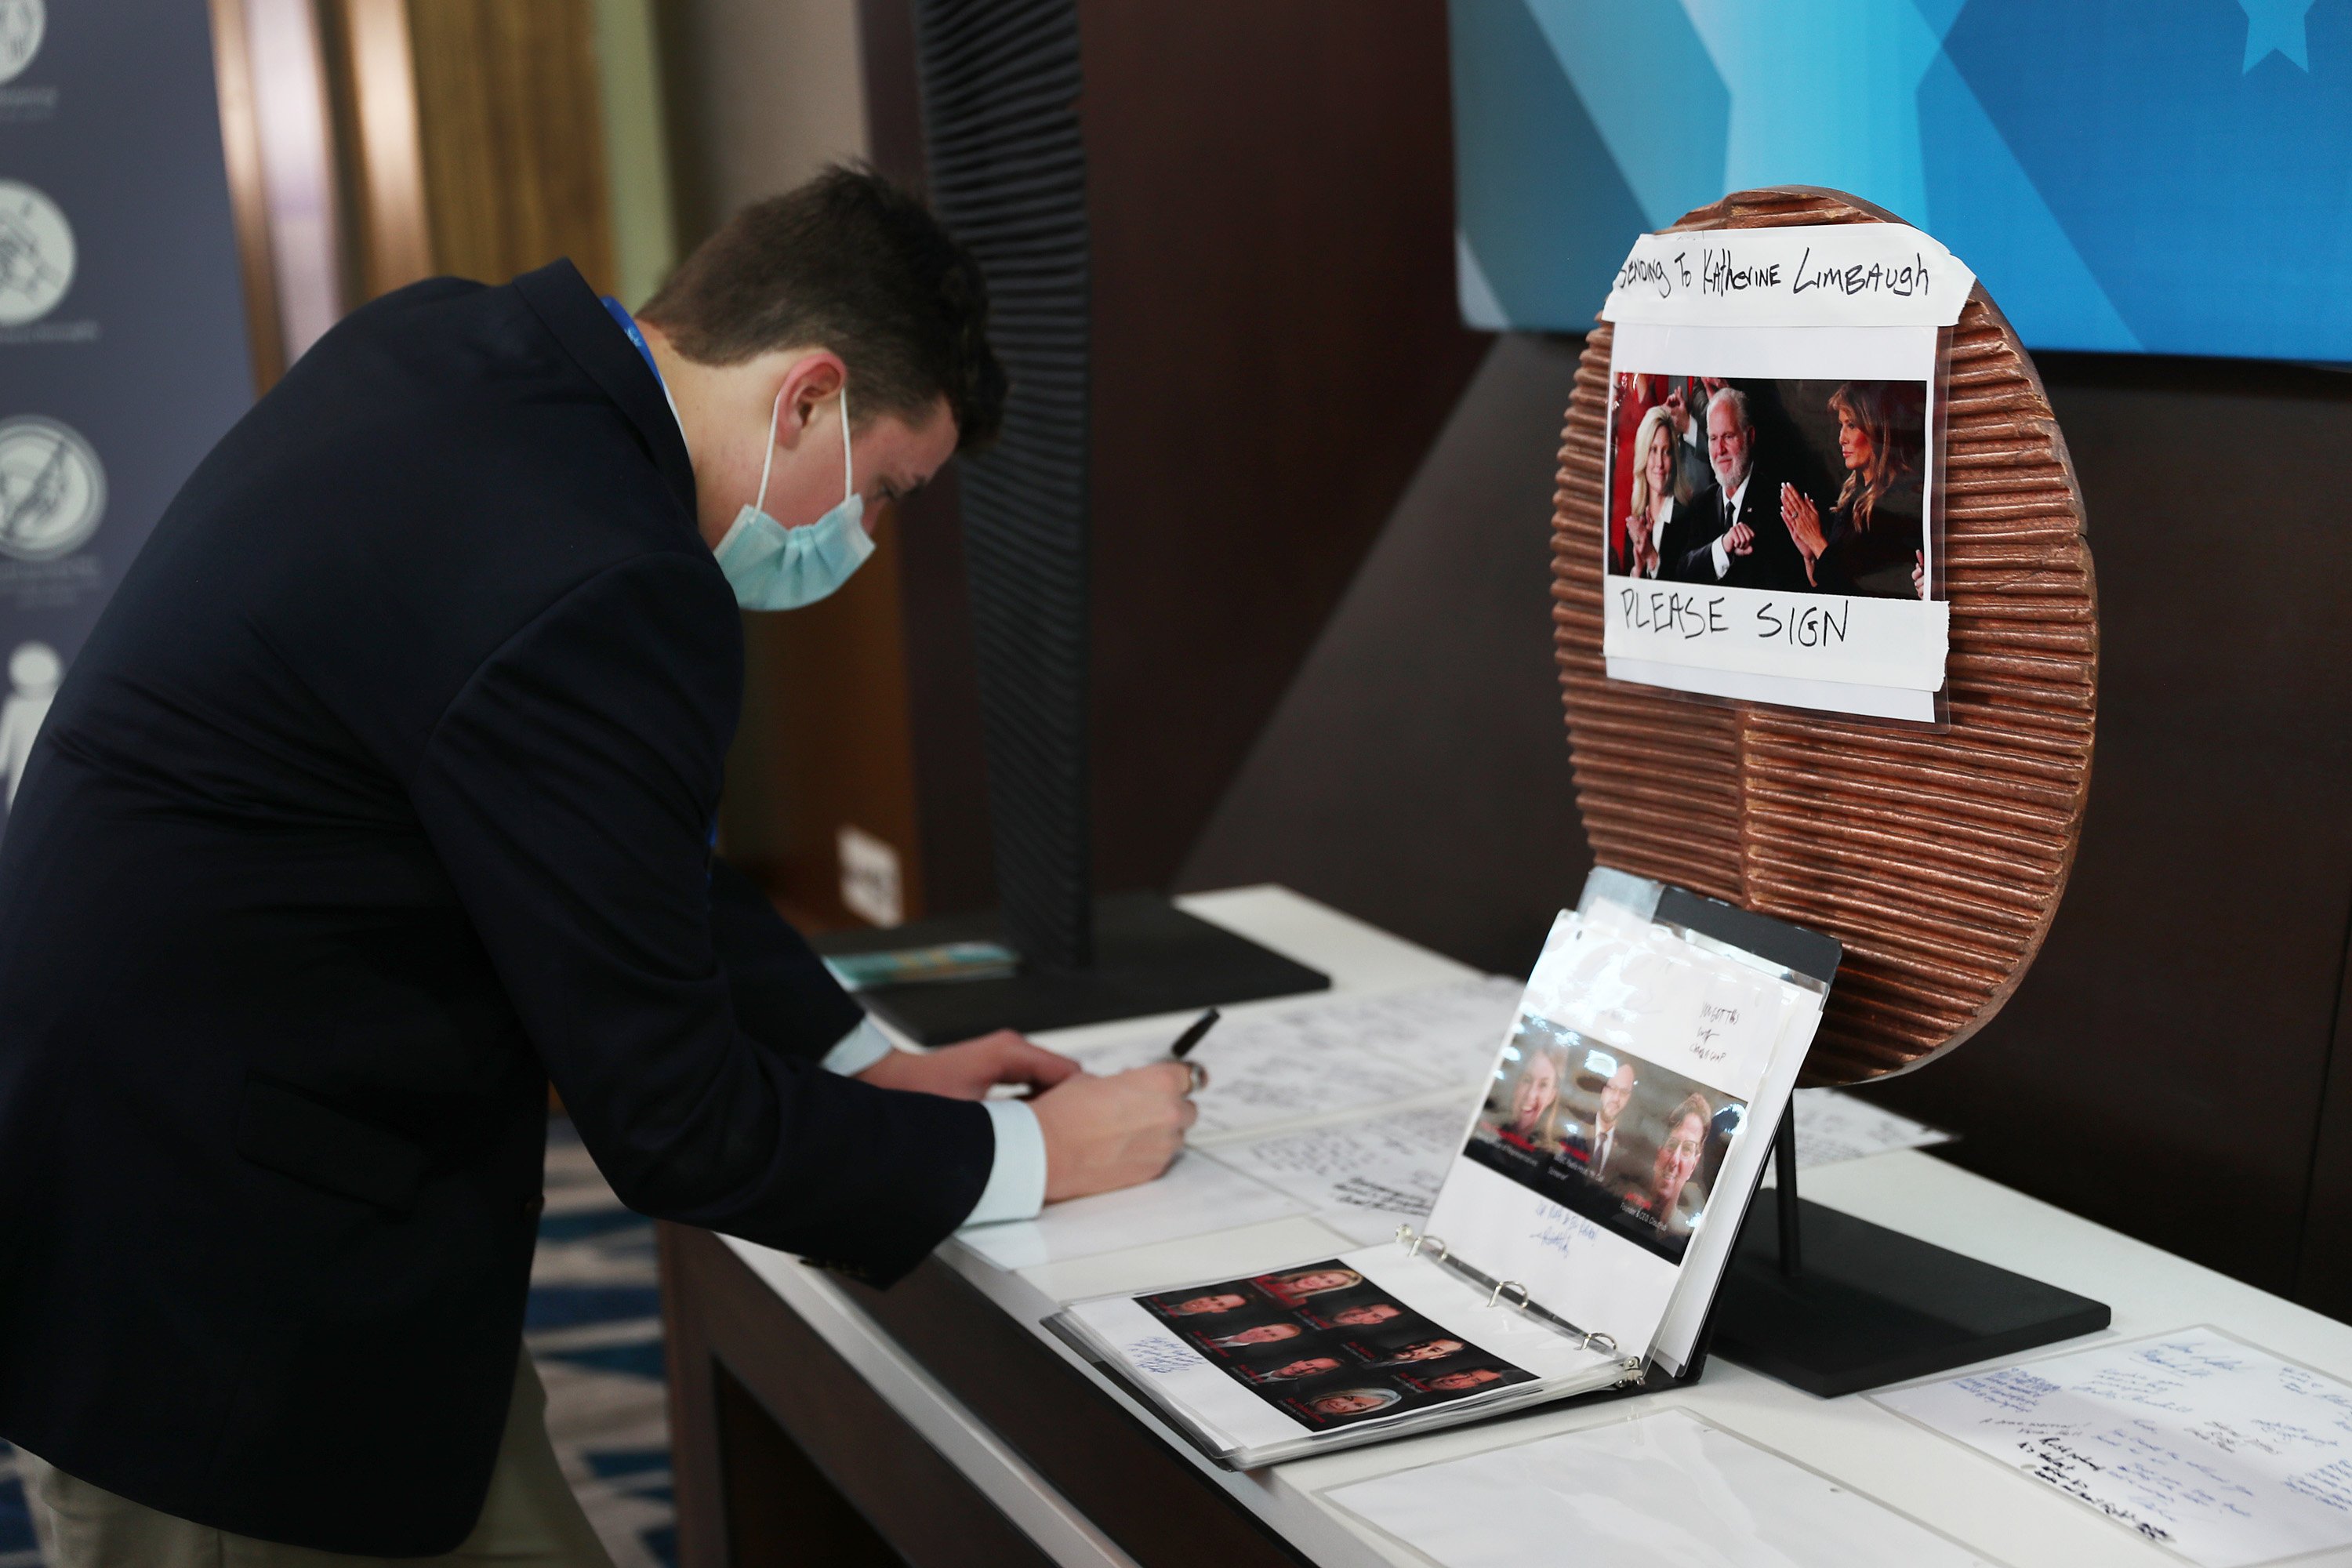 Easton Urbanek writes a message in a memorial honoring Rush Limbaugh at the Conservative Political Action Conference held in the Hyatt Regency on February 27, 2021 in Orlando, Florida. | Source: Getty Images